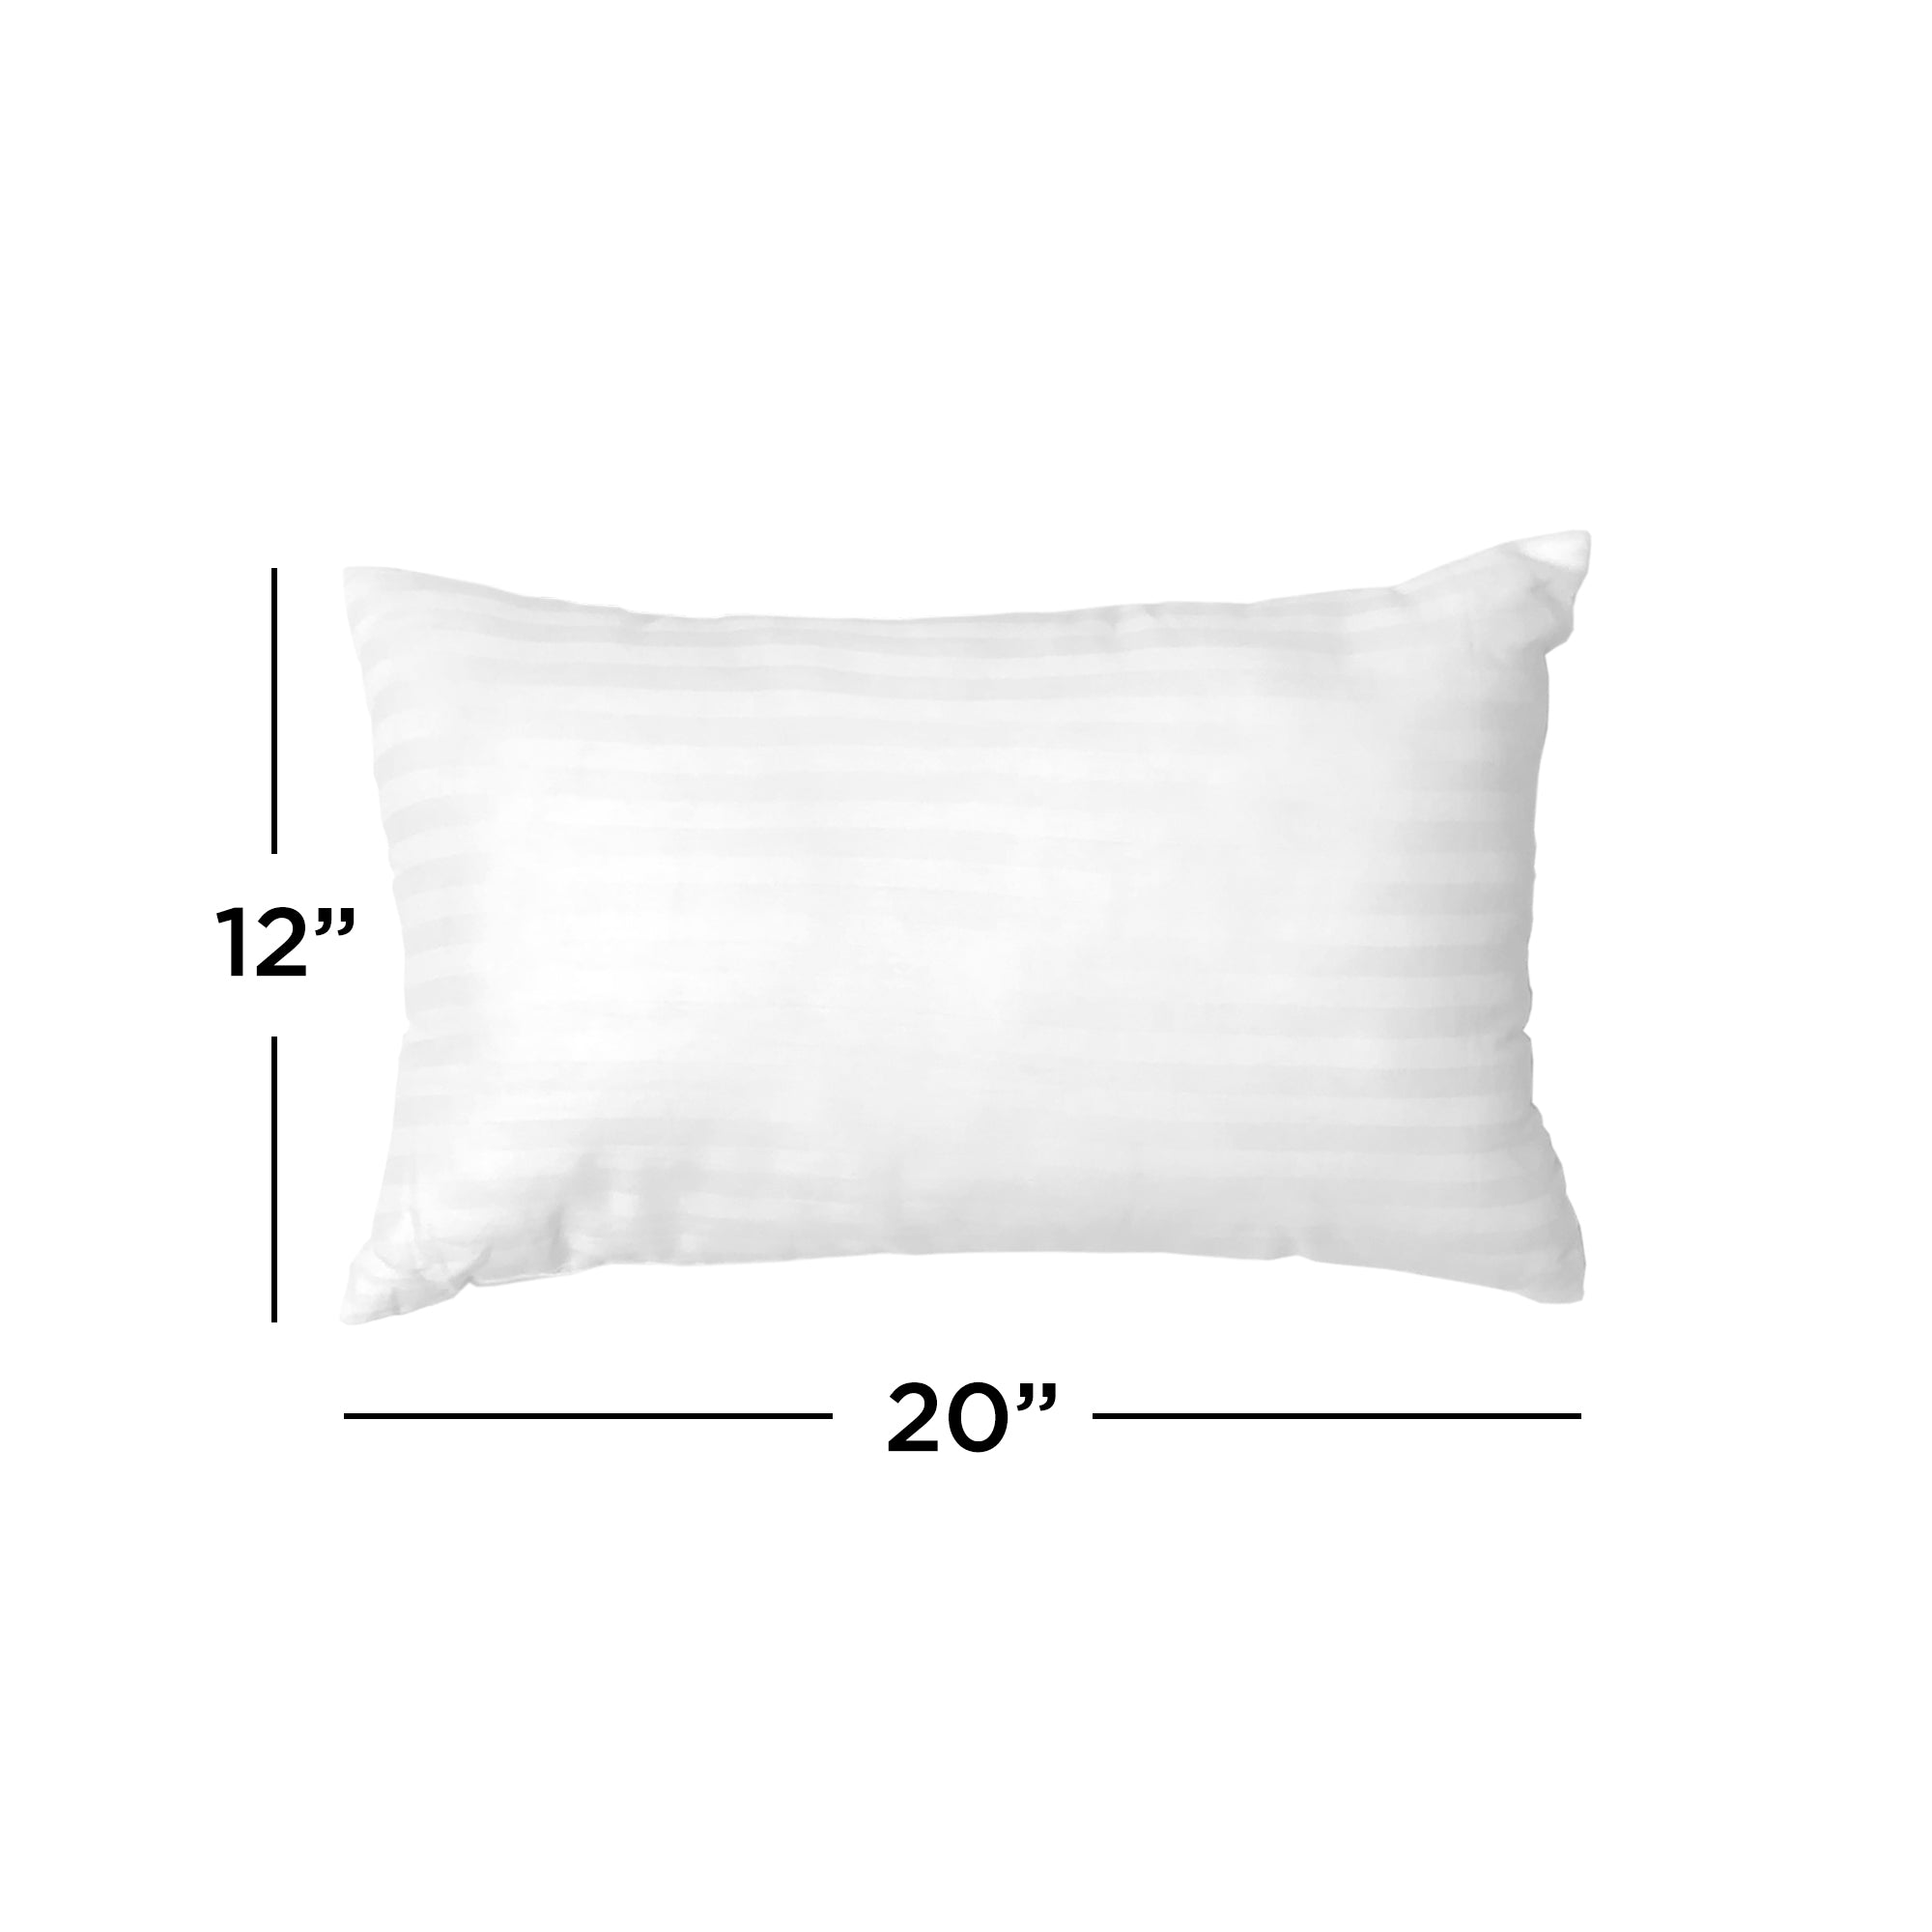 Decorator's Choice 18 Pillow Inserts